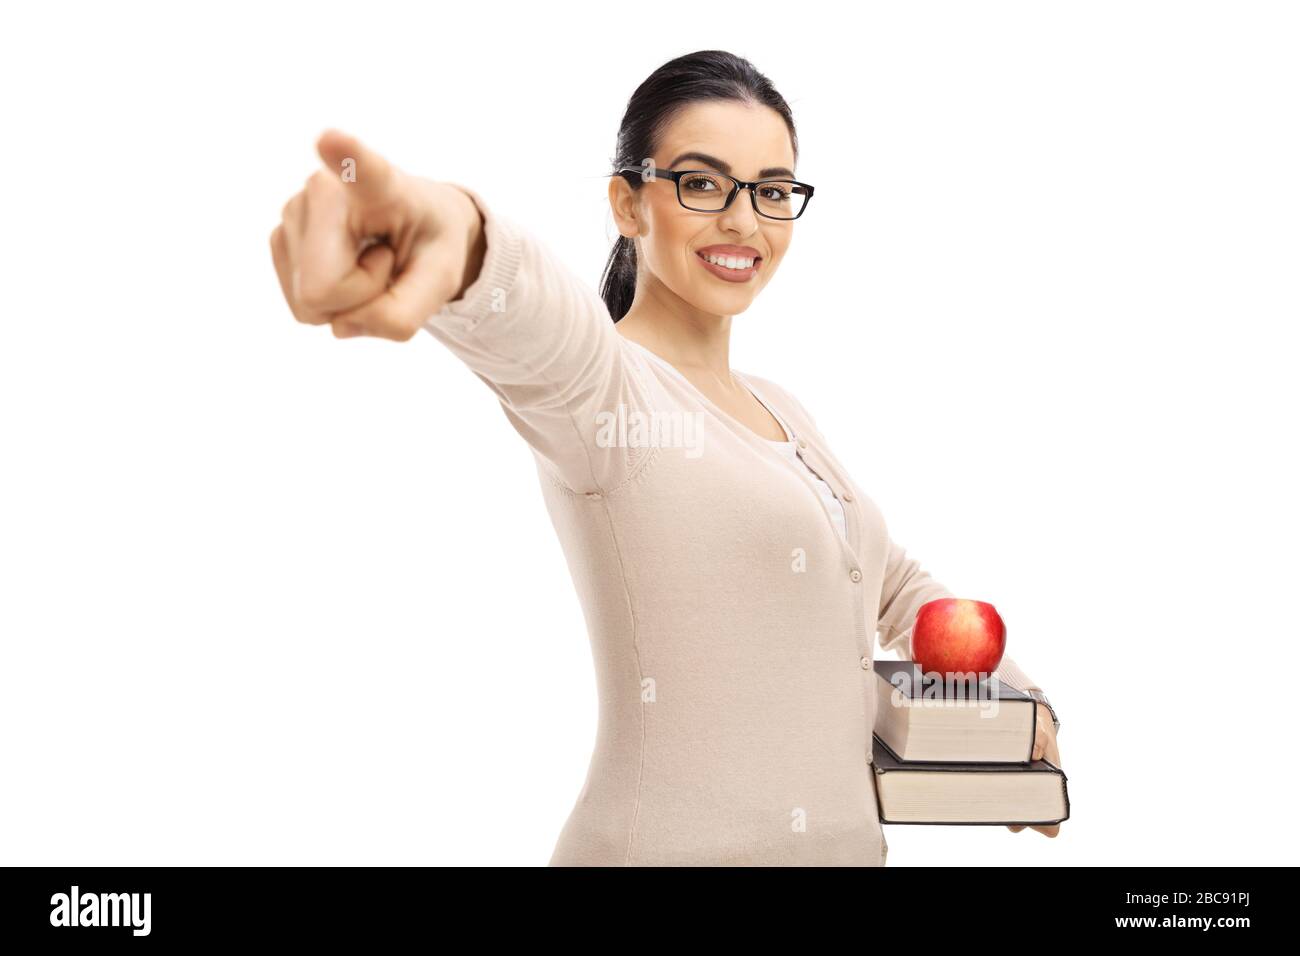 Young woman with glasses holding books and pointing isolated on white background Stock Photo